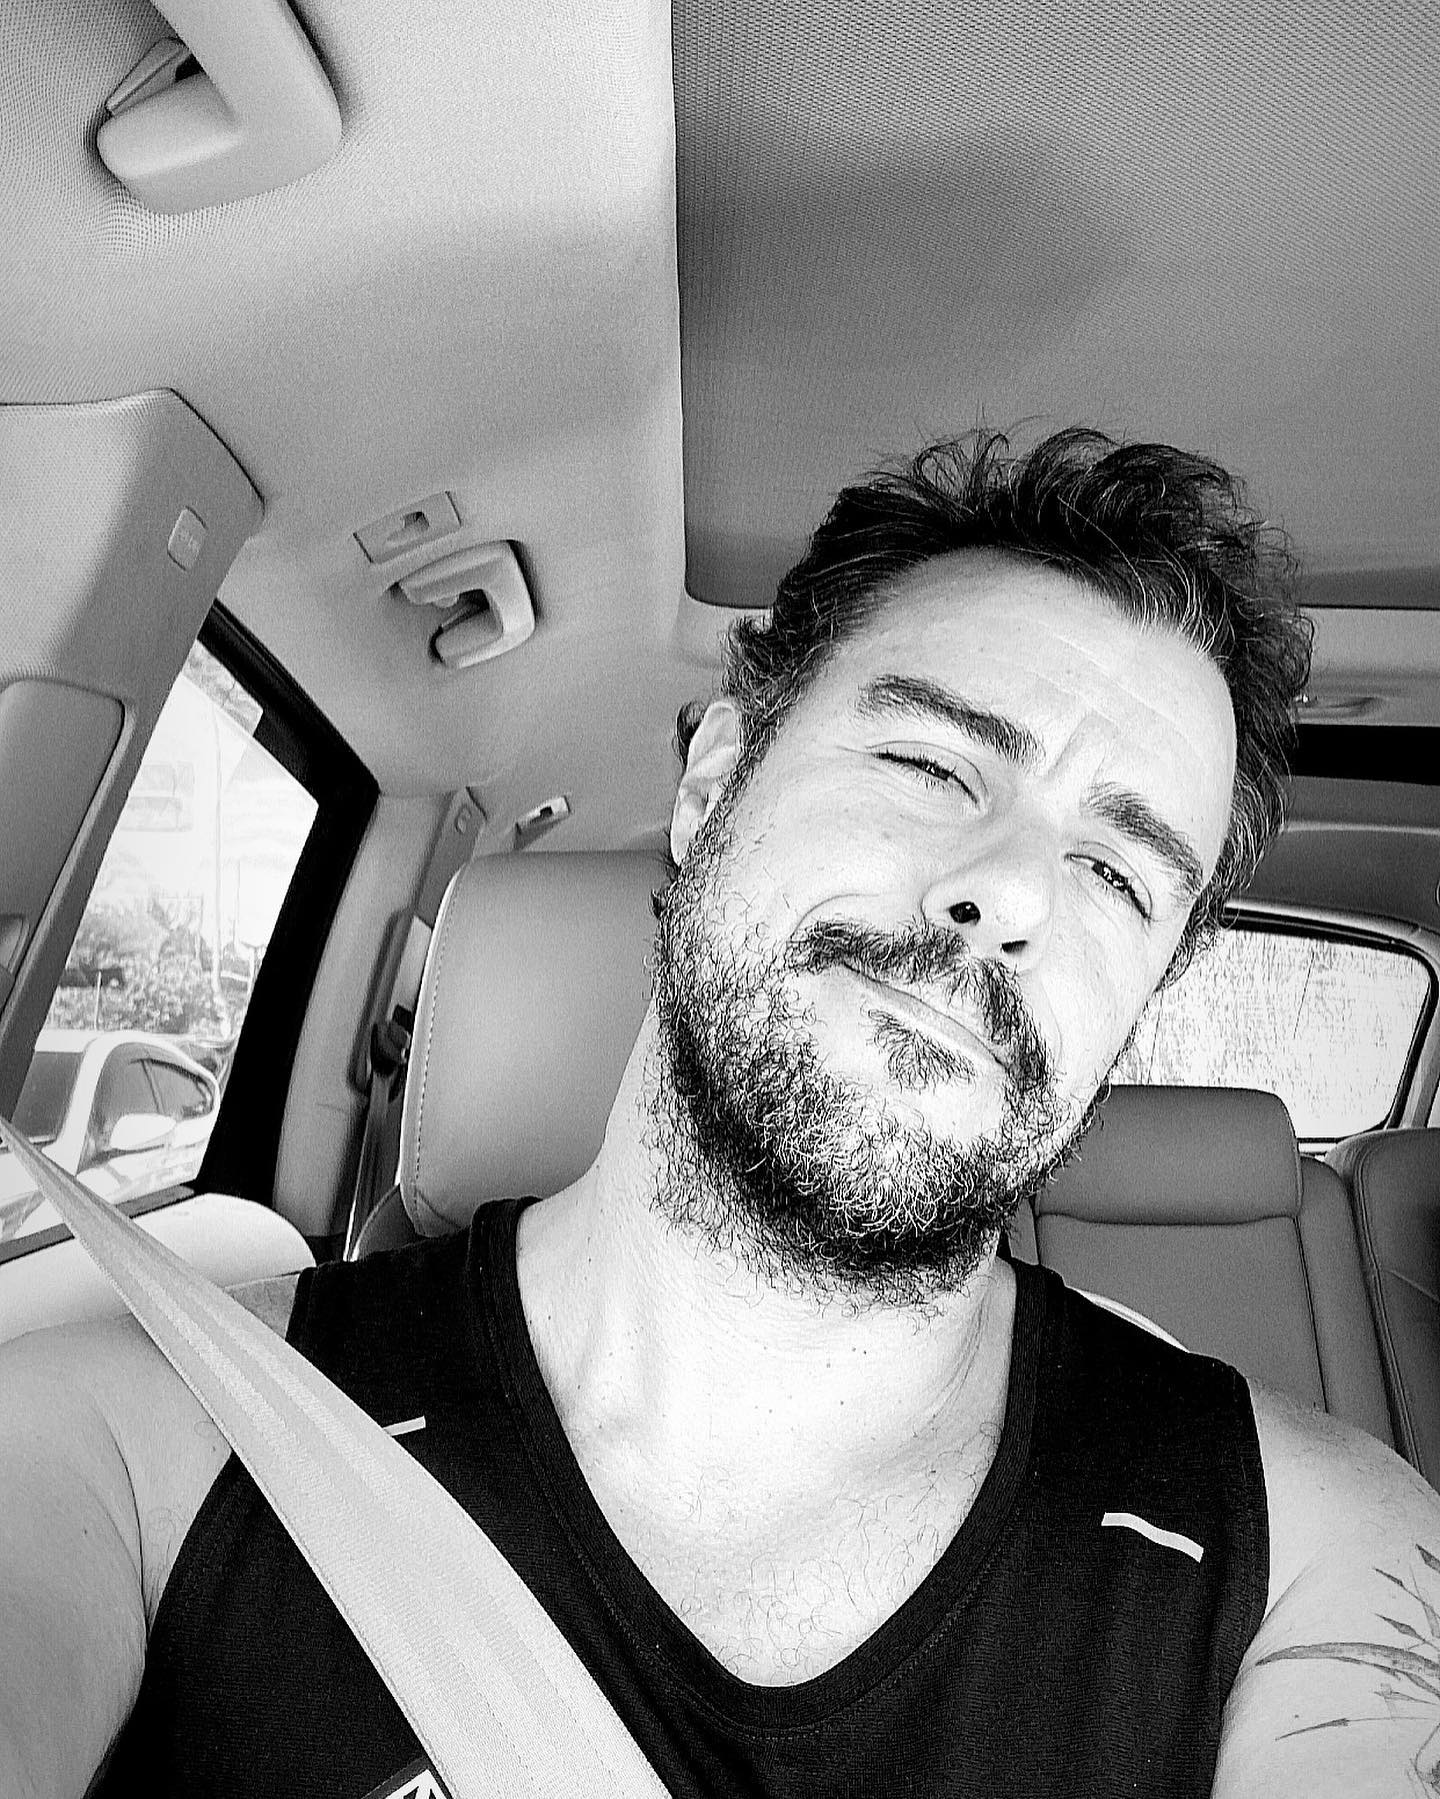 https://e.radikal.host/2023/04/22/Photo-by-Joaquim-Lopes-on-February-19-2023.-May-be-a-black-and-white-image-of-1-person-beard-tanktop-and-seatbelt..jpg